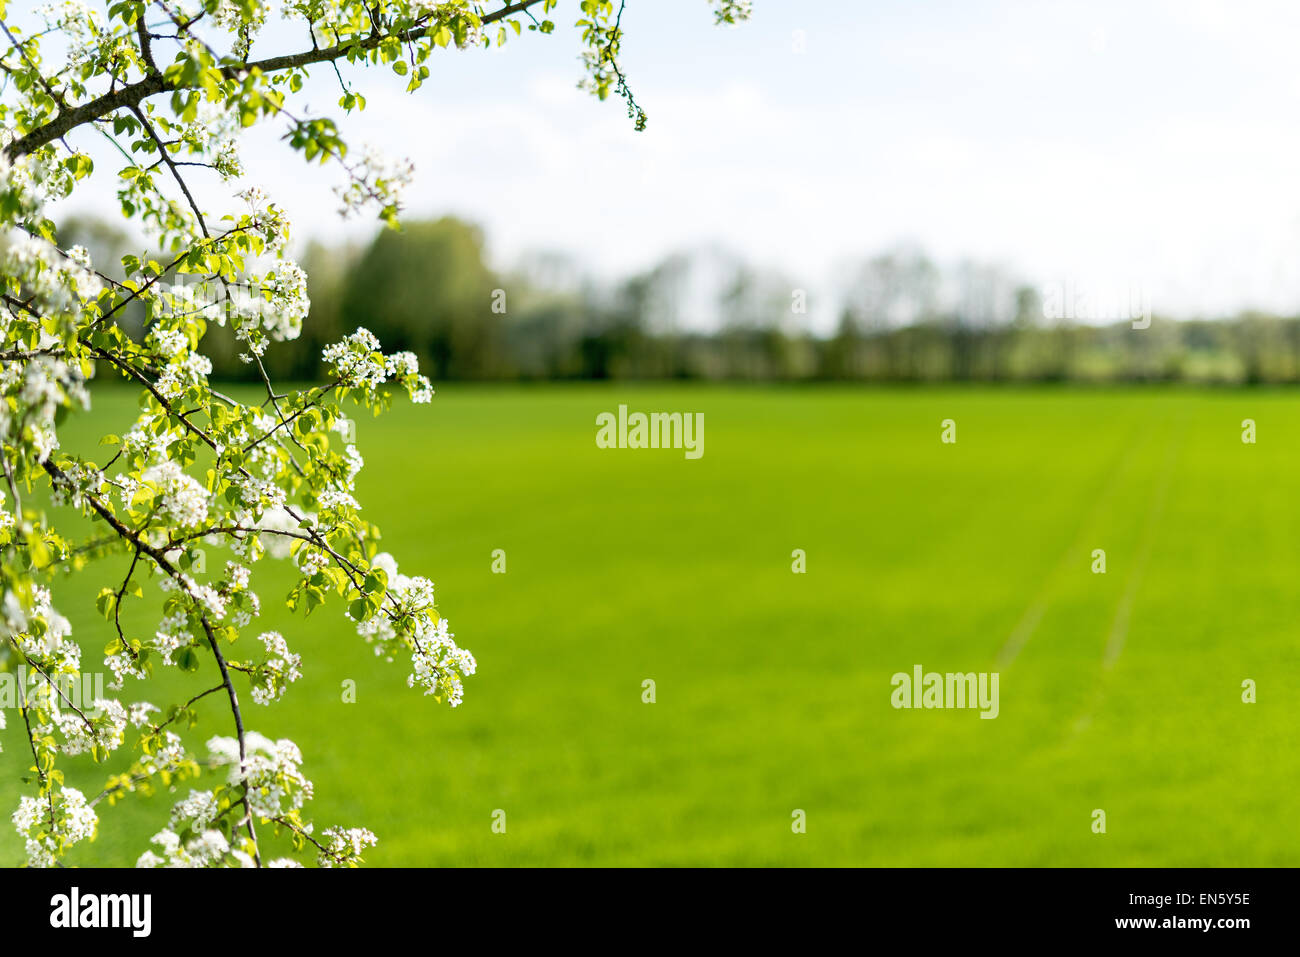 Spring willow green bloomed blooming sloe meadow green space for text layout, field margins field, acre, symbol symbolic lichtna Stock Photo